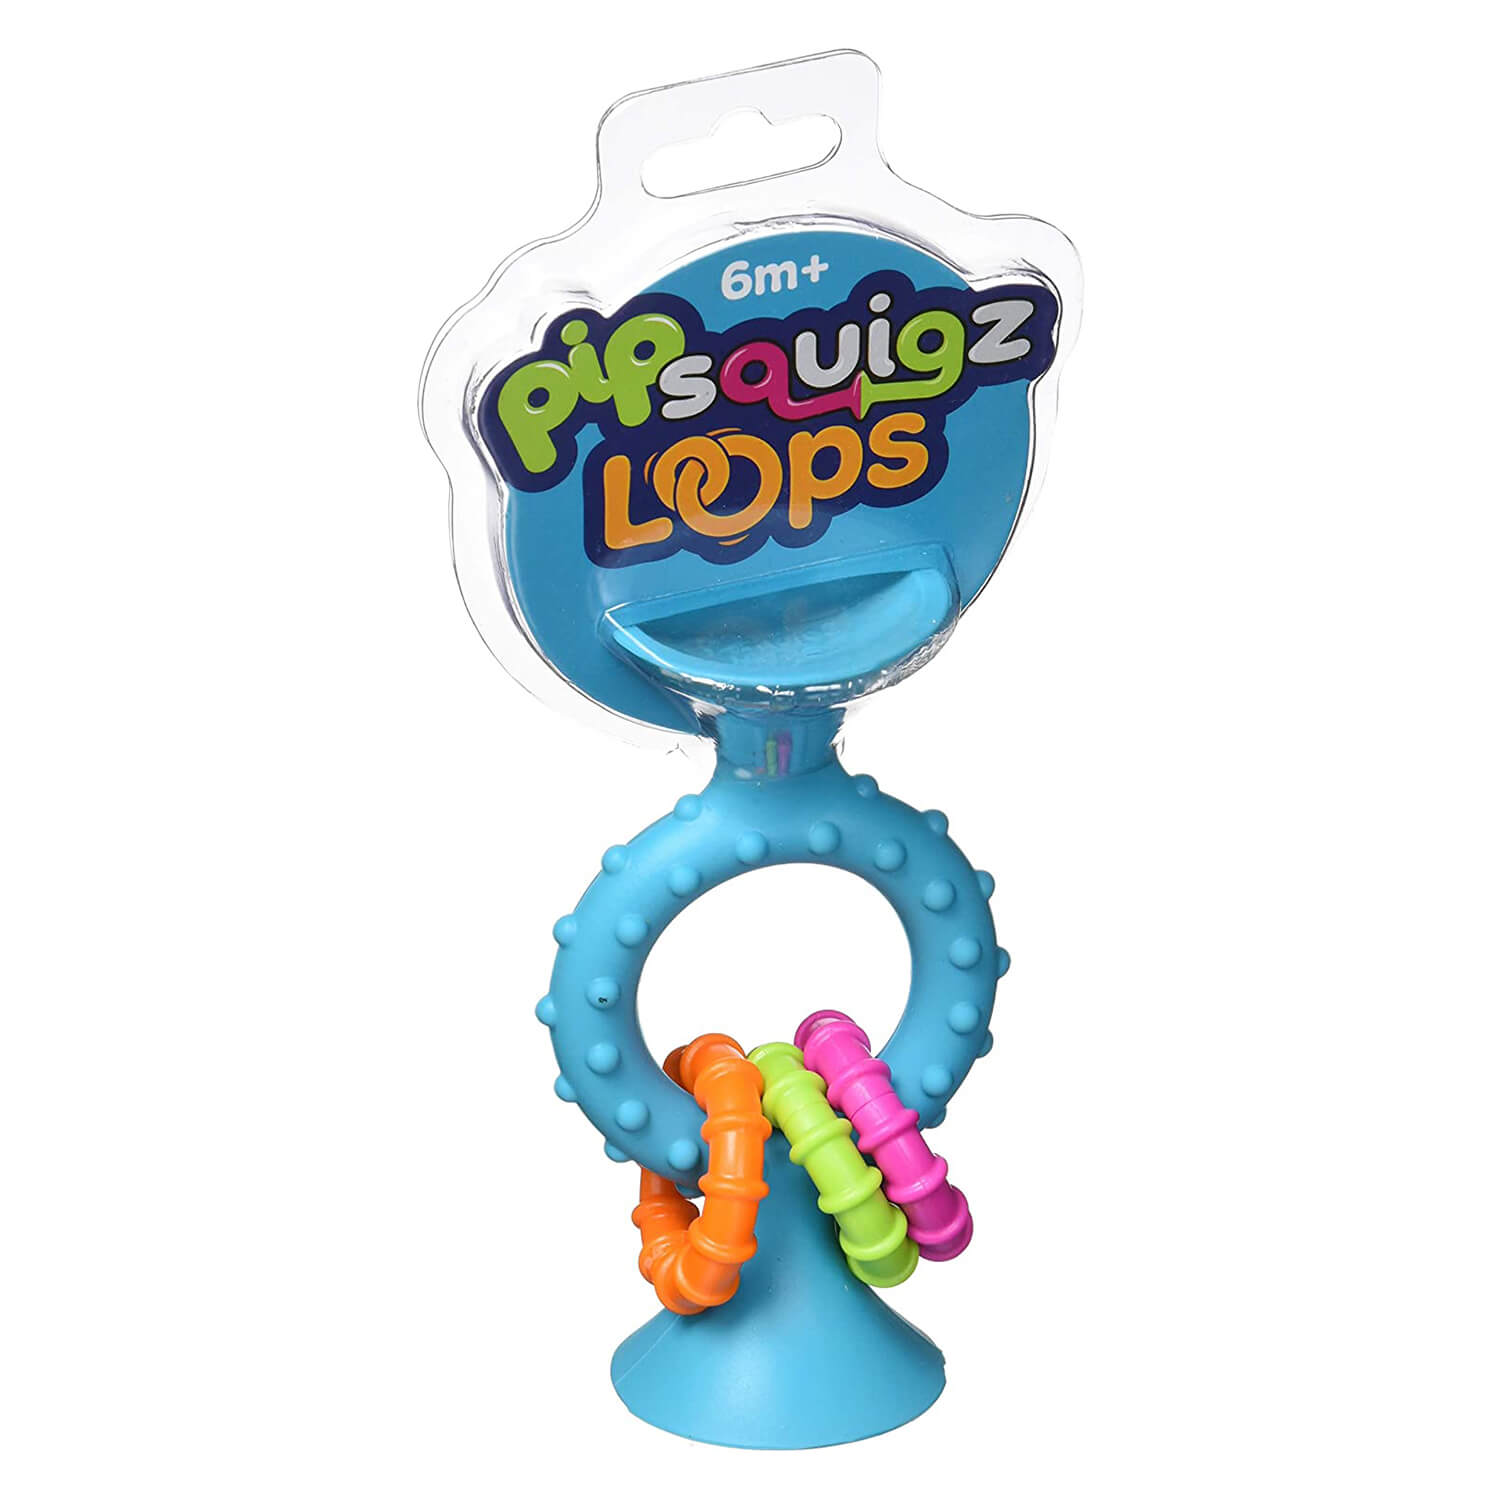 Front view of the Fat Brain Toys pipSquigz Loops - Teal package.